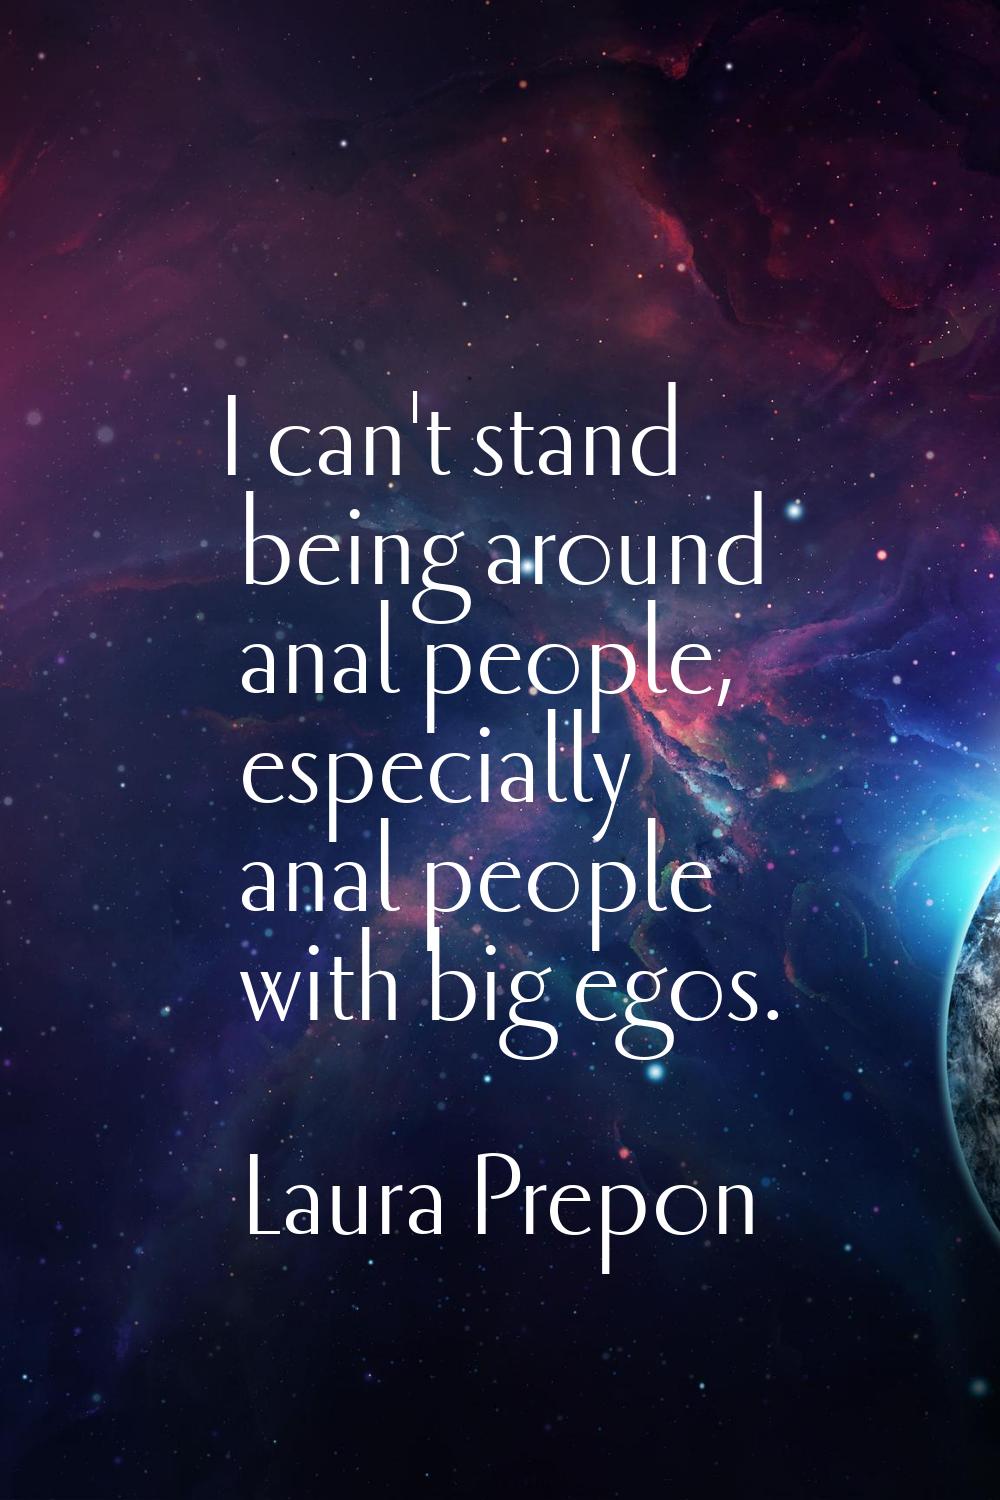 I can't stand being around anal people, especially anal people with big egos.